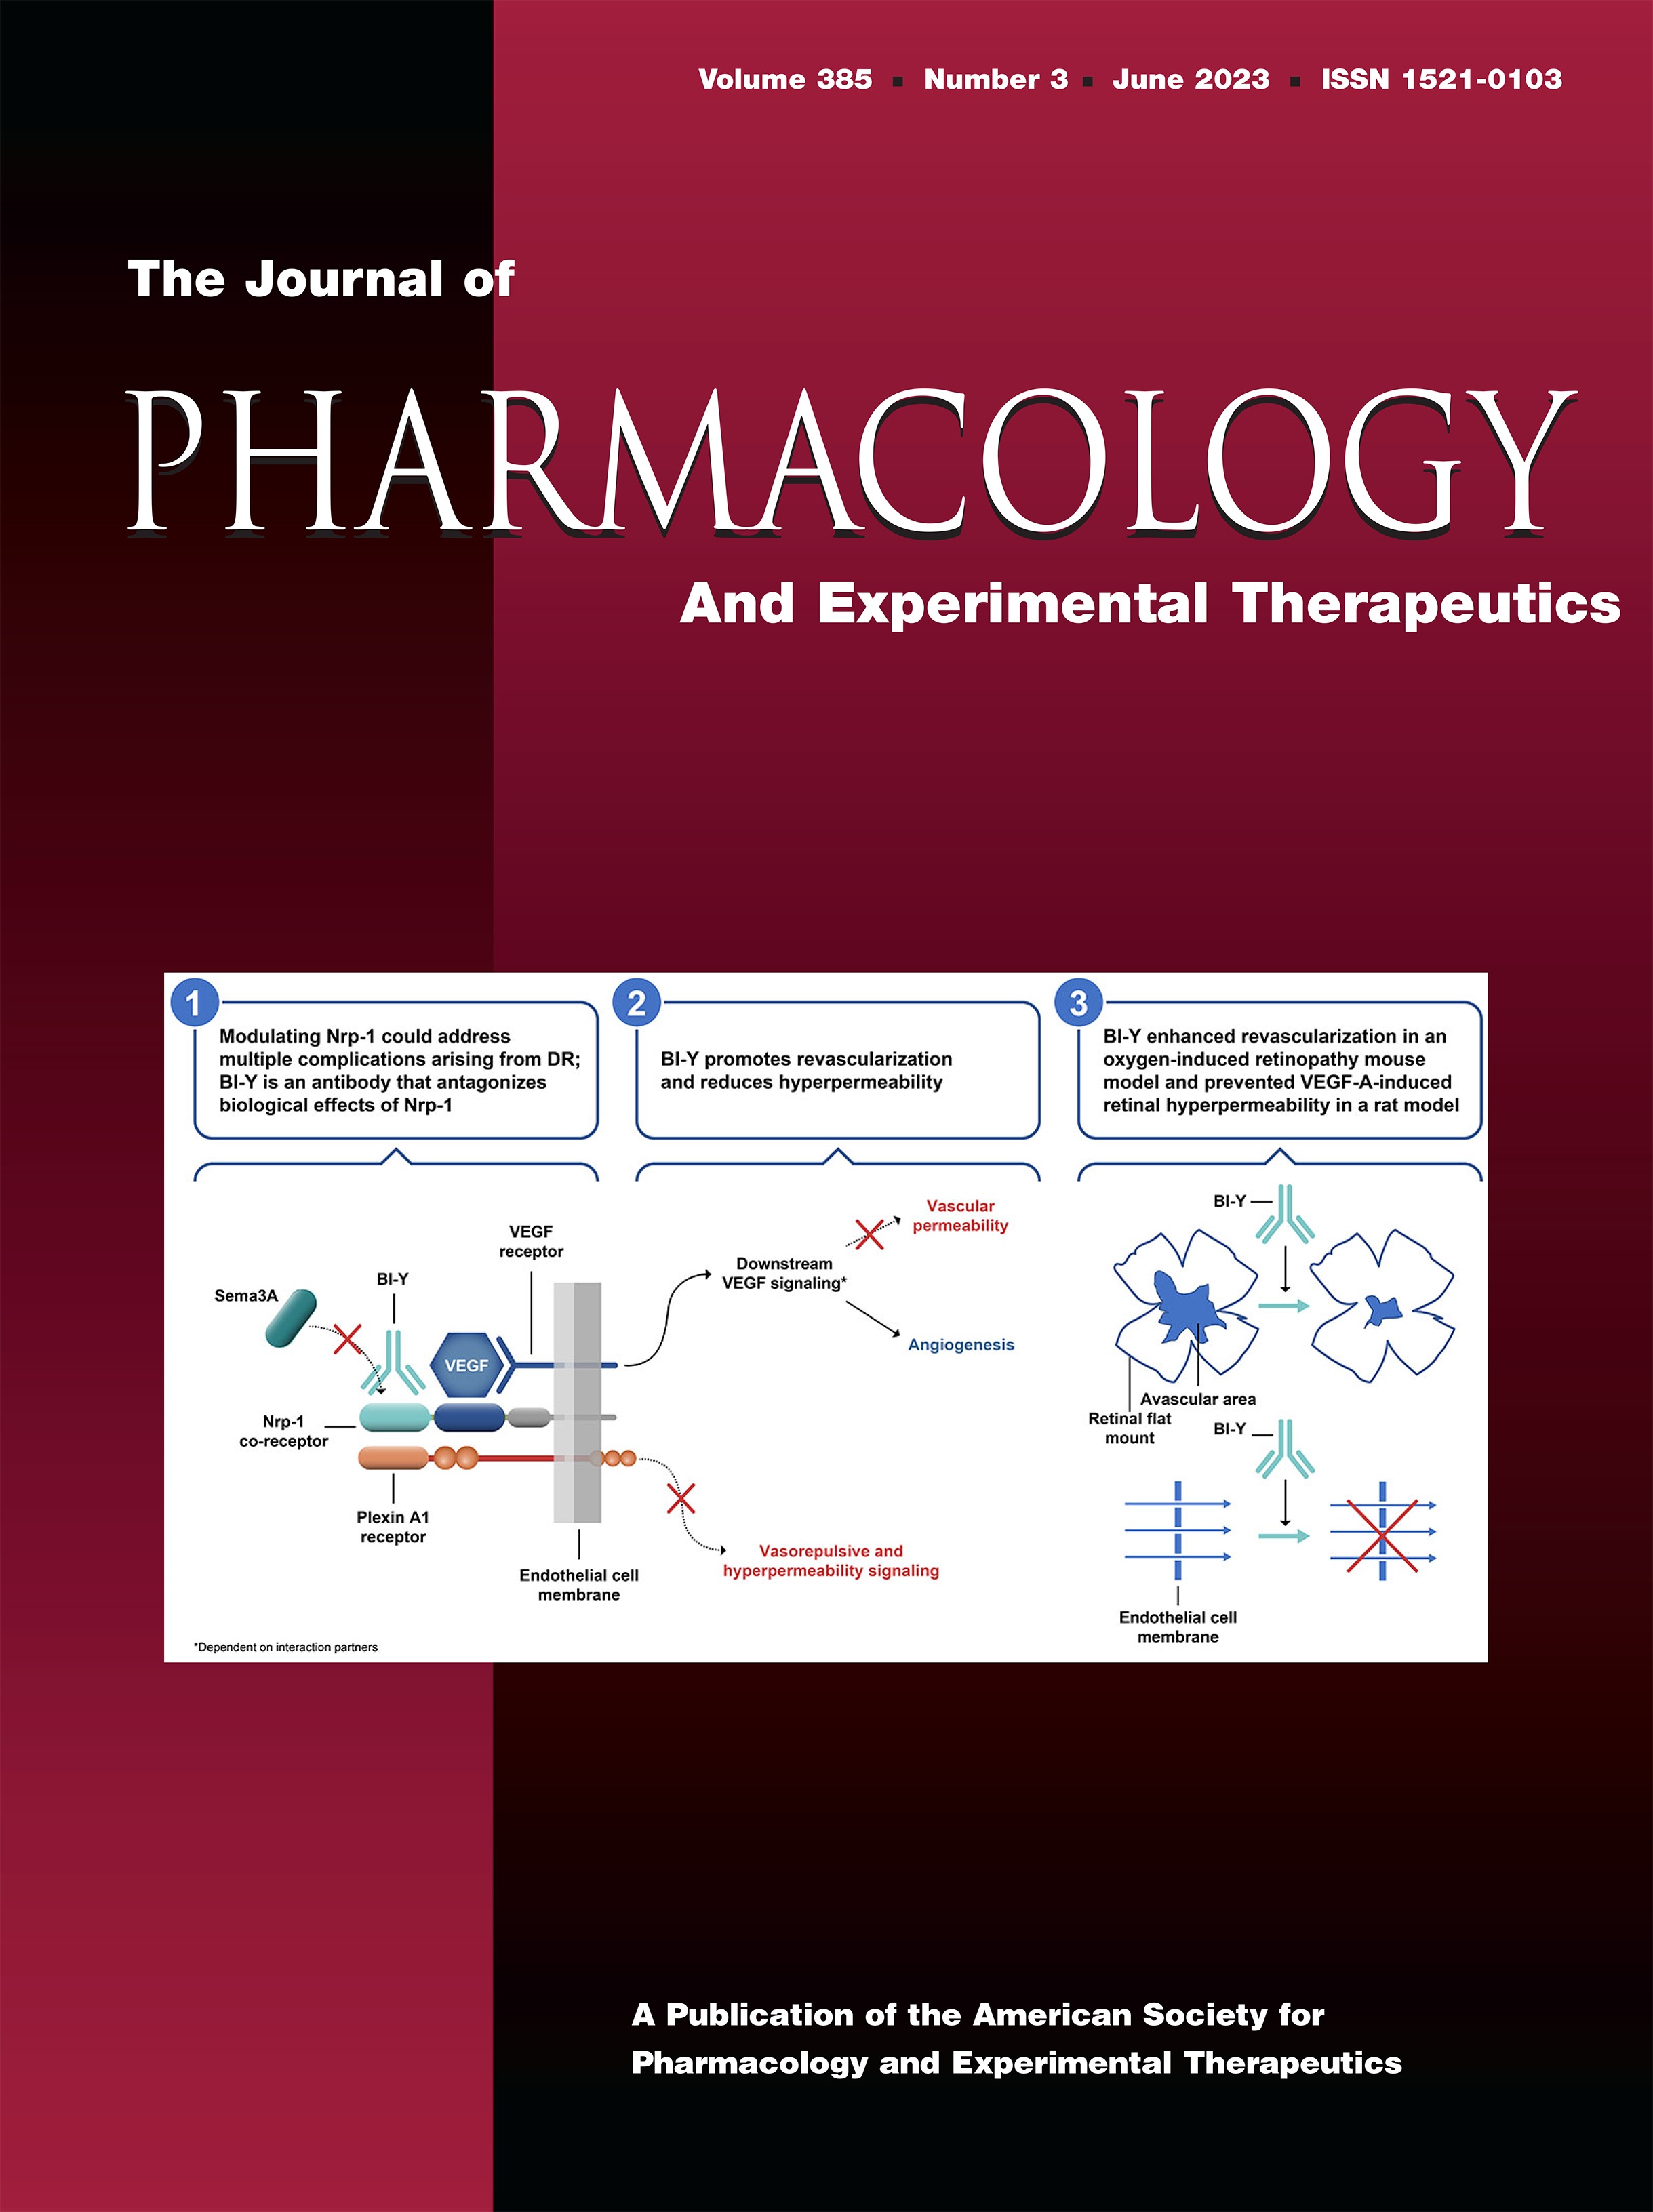 TAK-994, a Novel Orally Available Brain-Penetrant Orexin 2 Receptor-Selective Agonist, Suppresses Fragmentation of Wakefulness and Cataplexy-Like Episodes in Mouse Models of Narcolepsy [Drug Discovery and Translational Medicine]